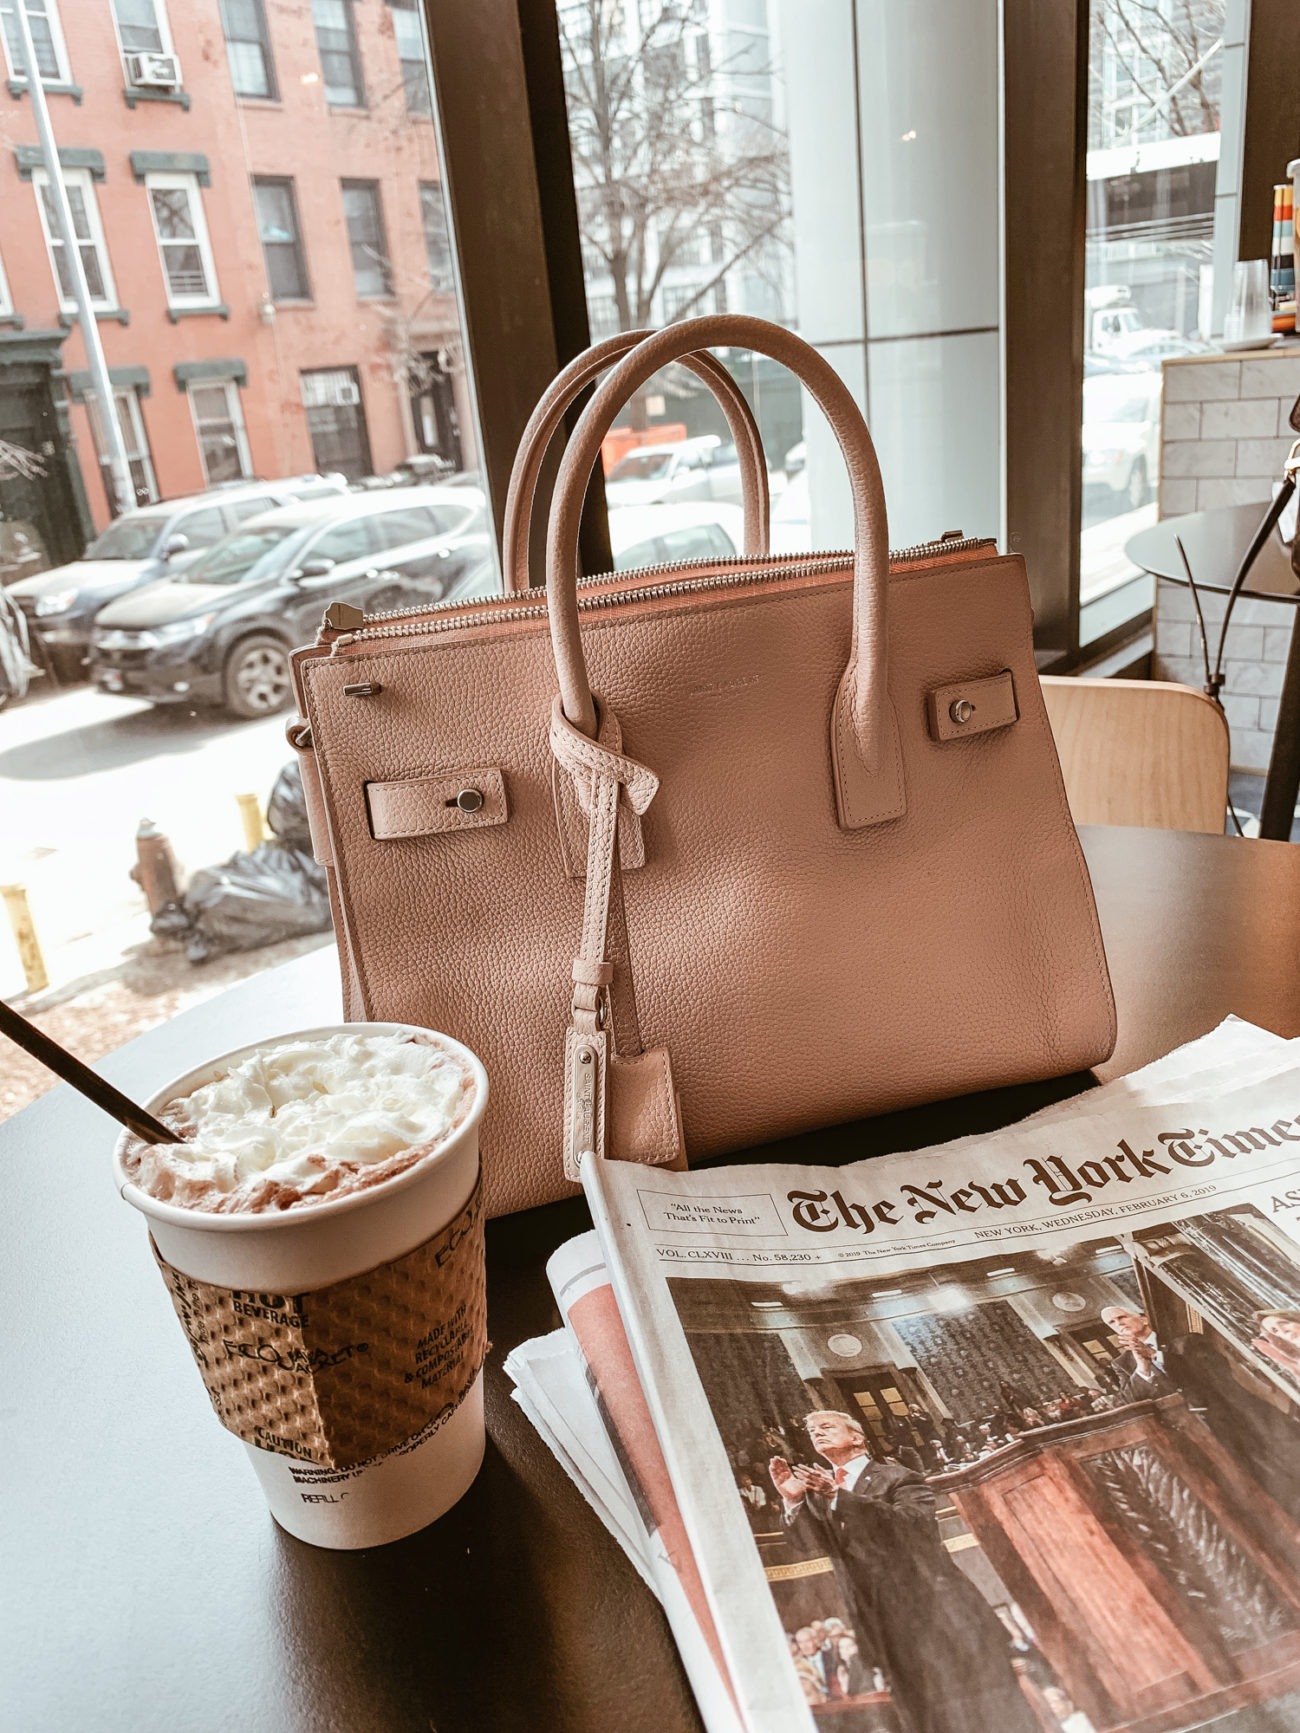 The Tillary Hotel Brooklyn, New York | New York Fashion Week | Hotels in NYC | Travel | Blondie in the City by Hayley Larue